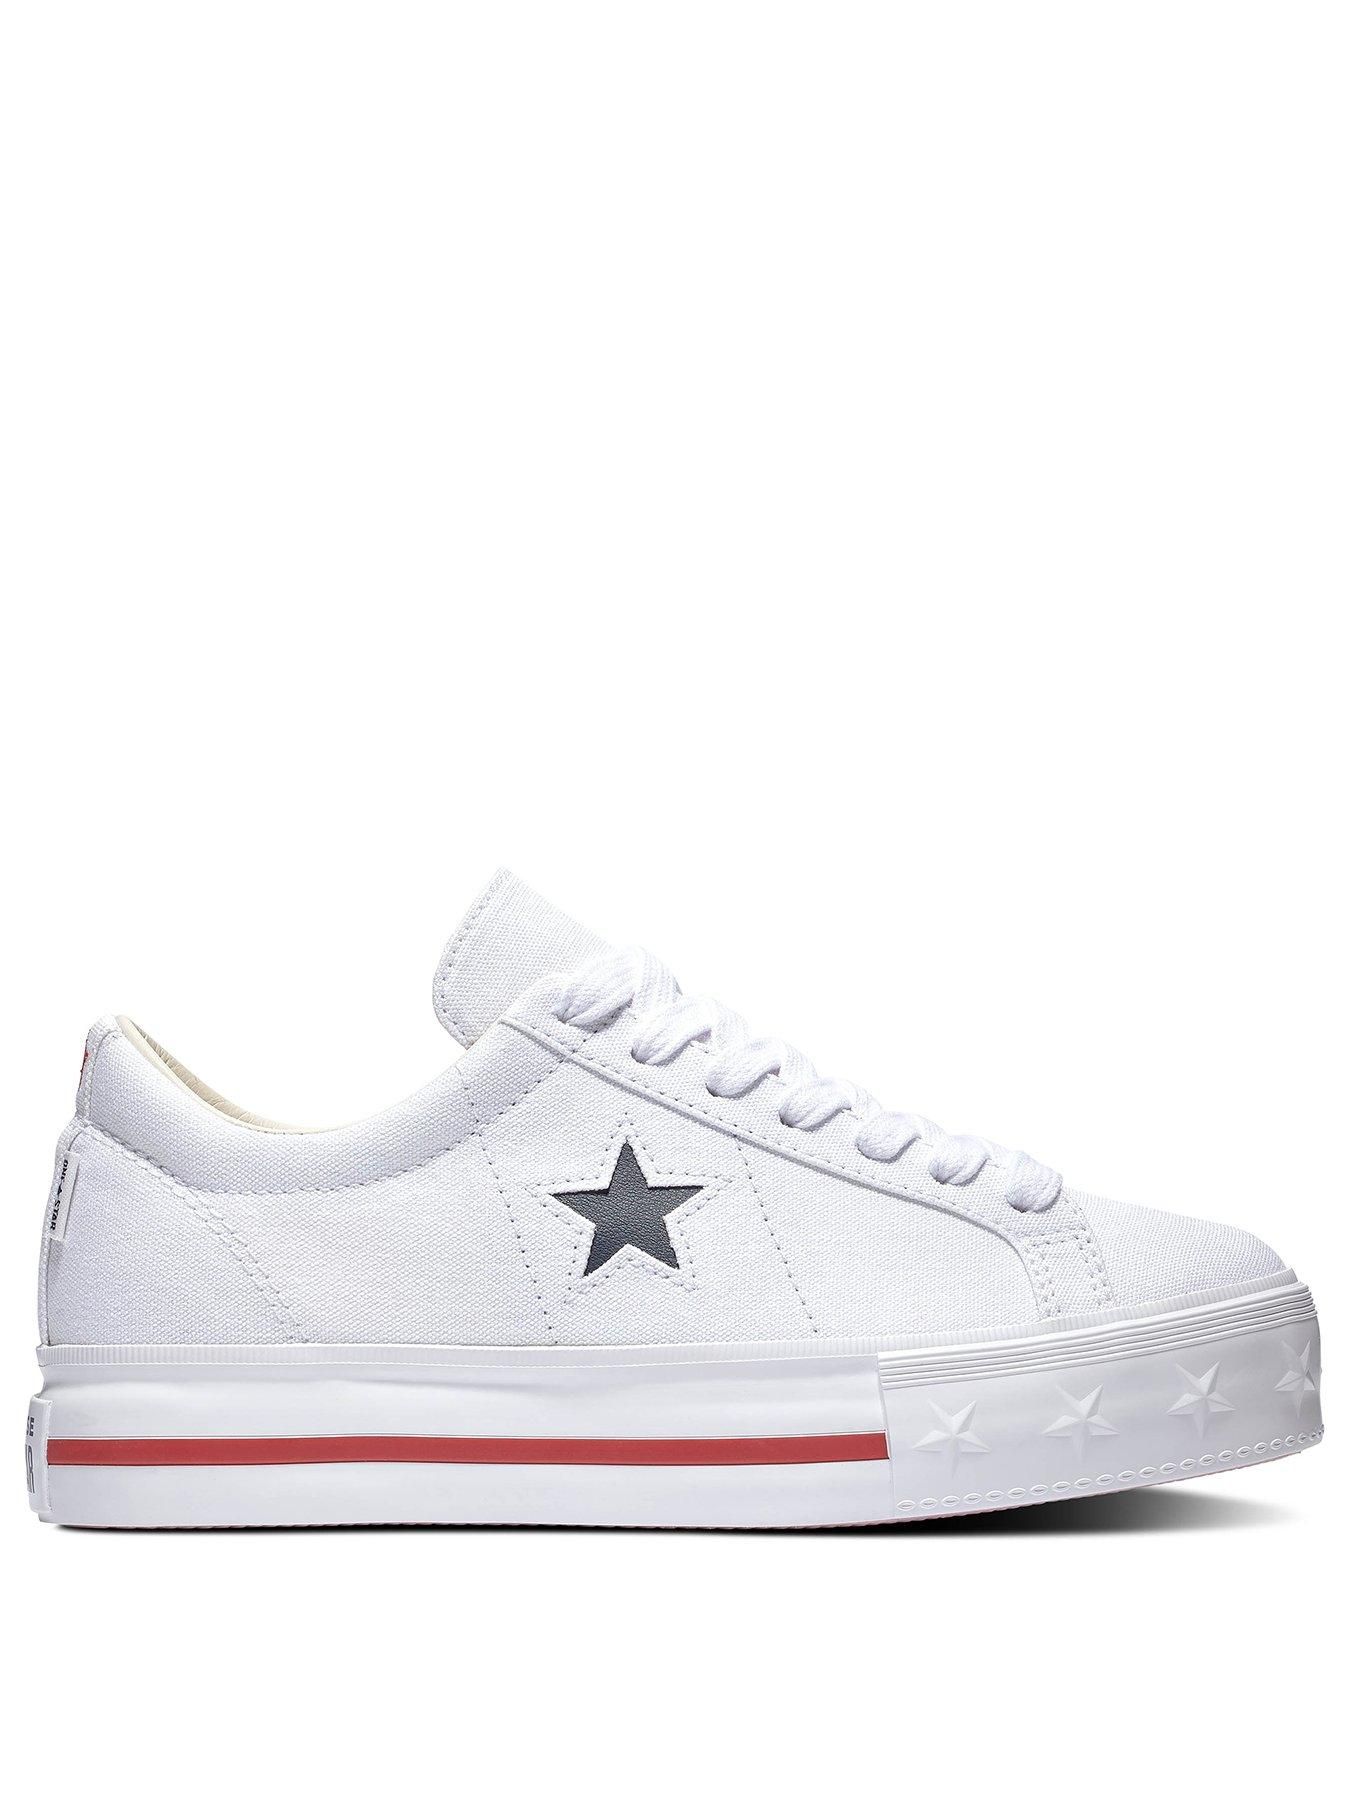 converse one star lift ox